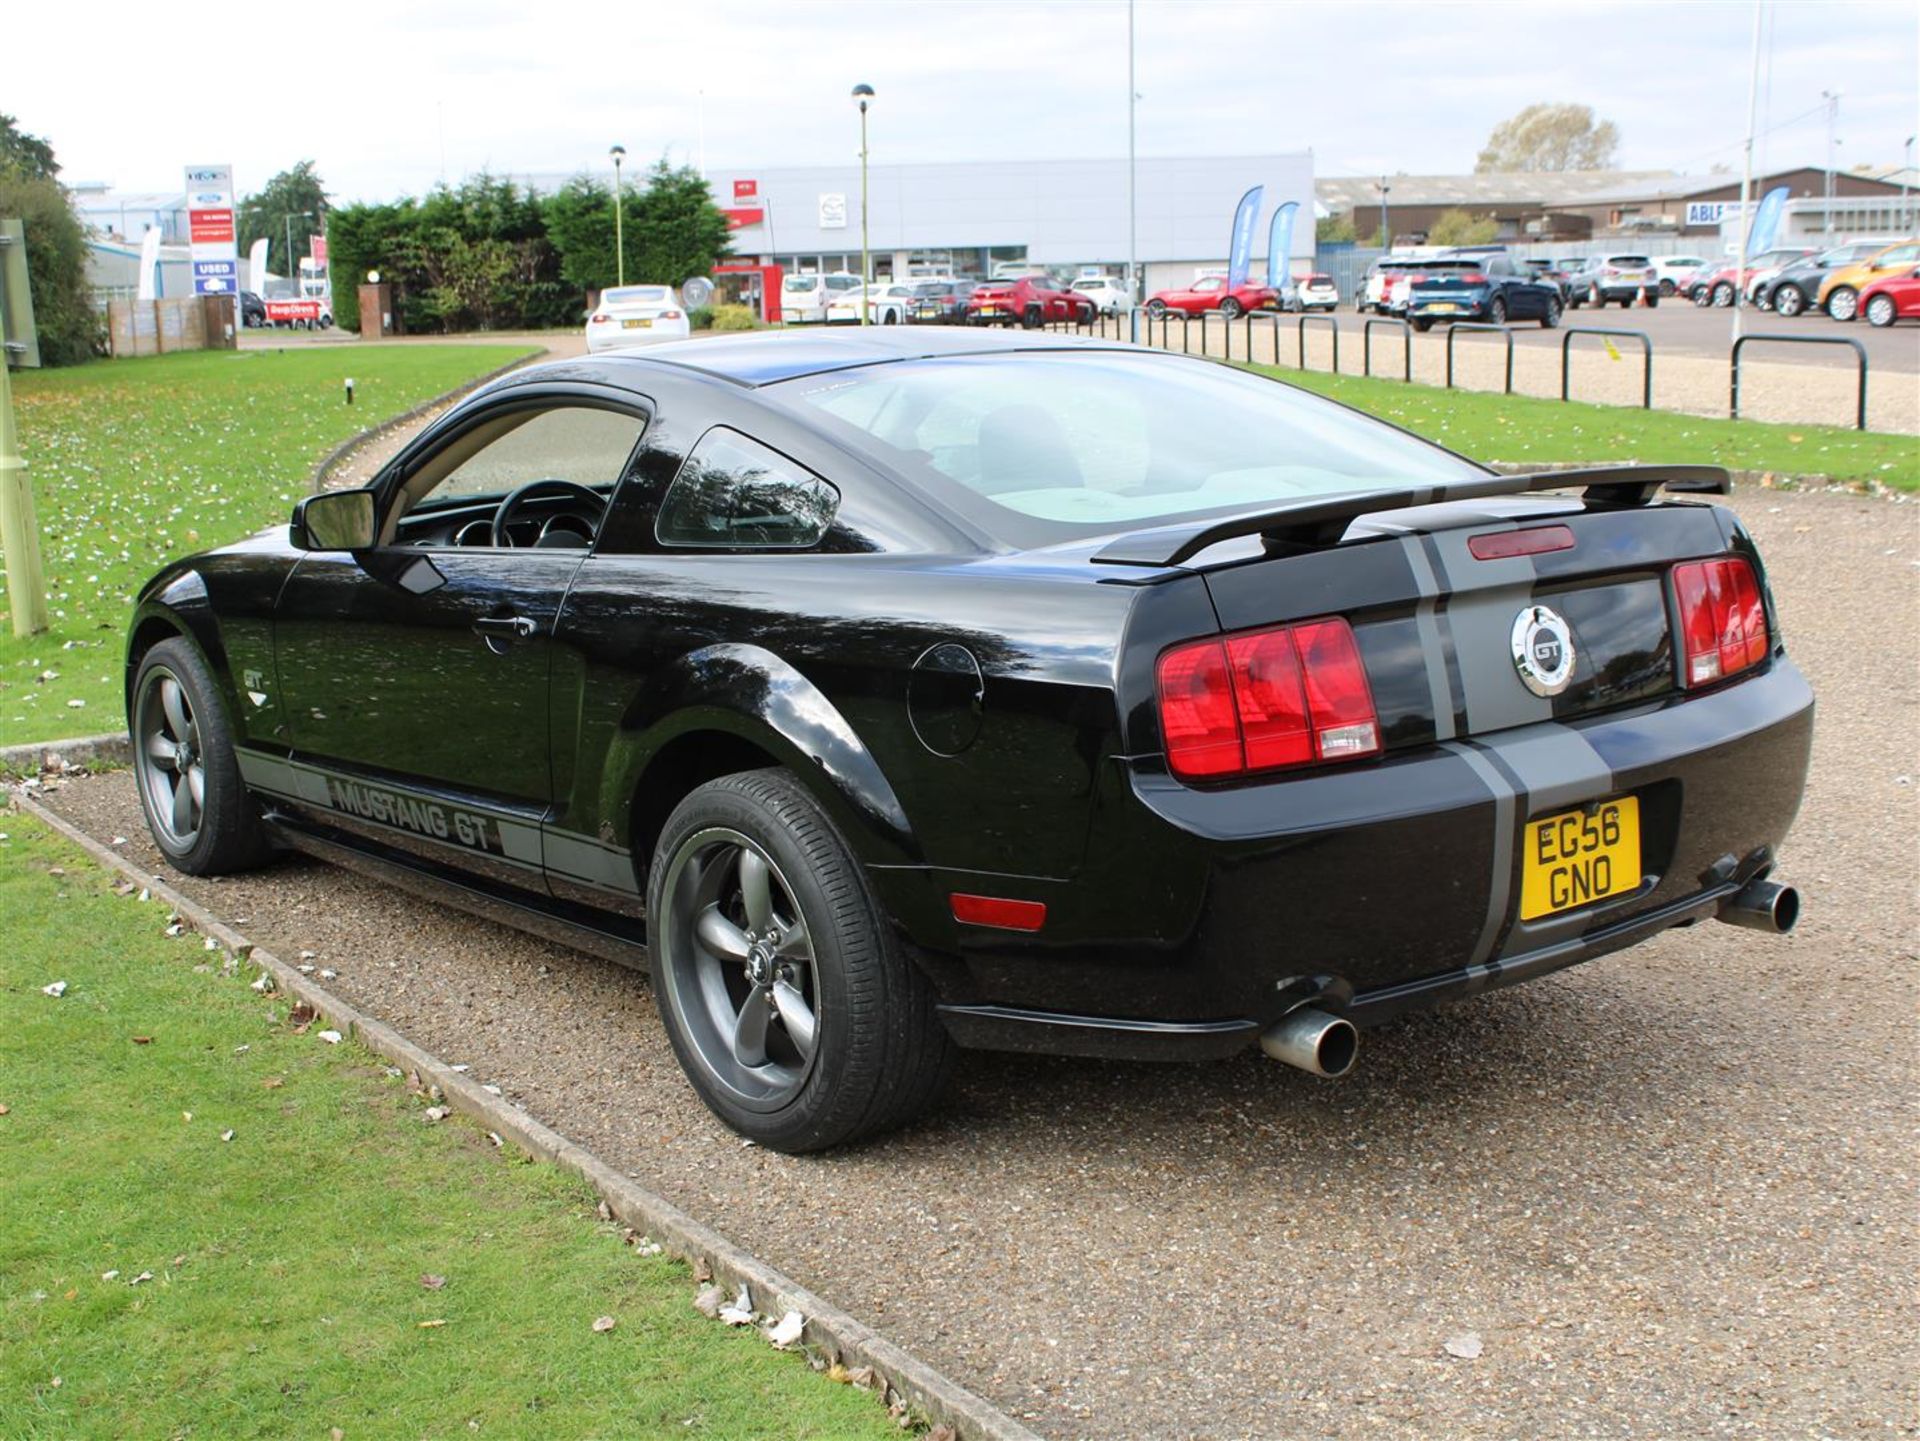 2007 Ford Mustang 4.6 V8 GT LHD - Image 7 of 23